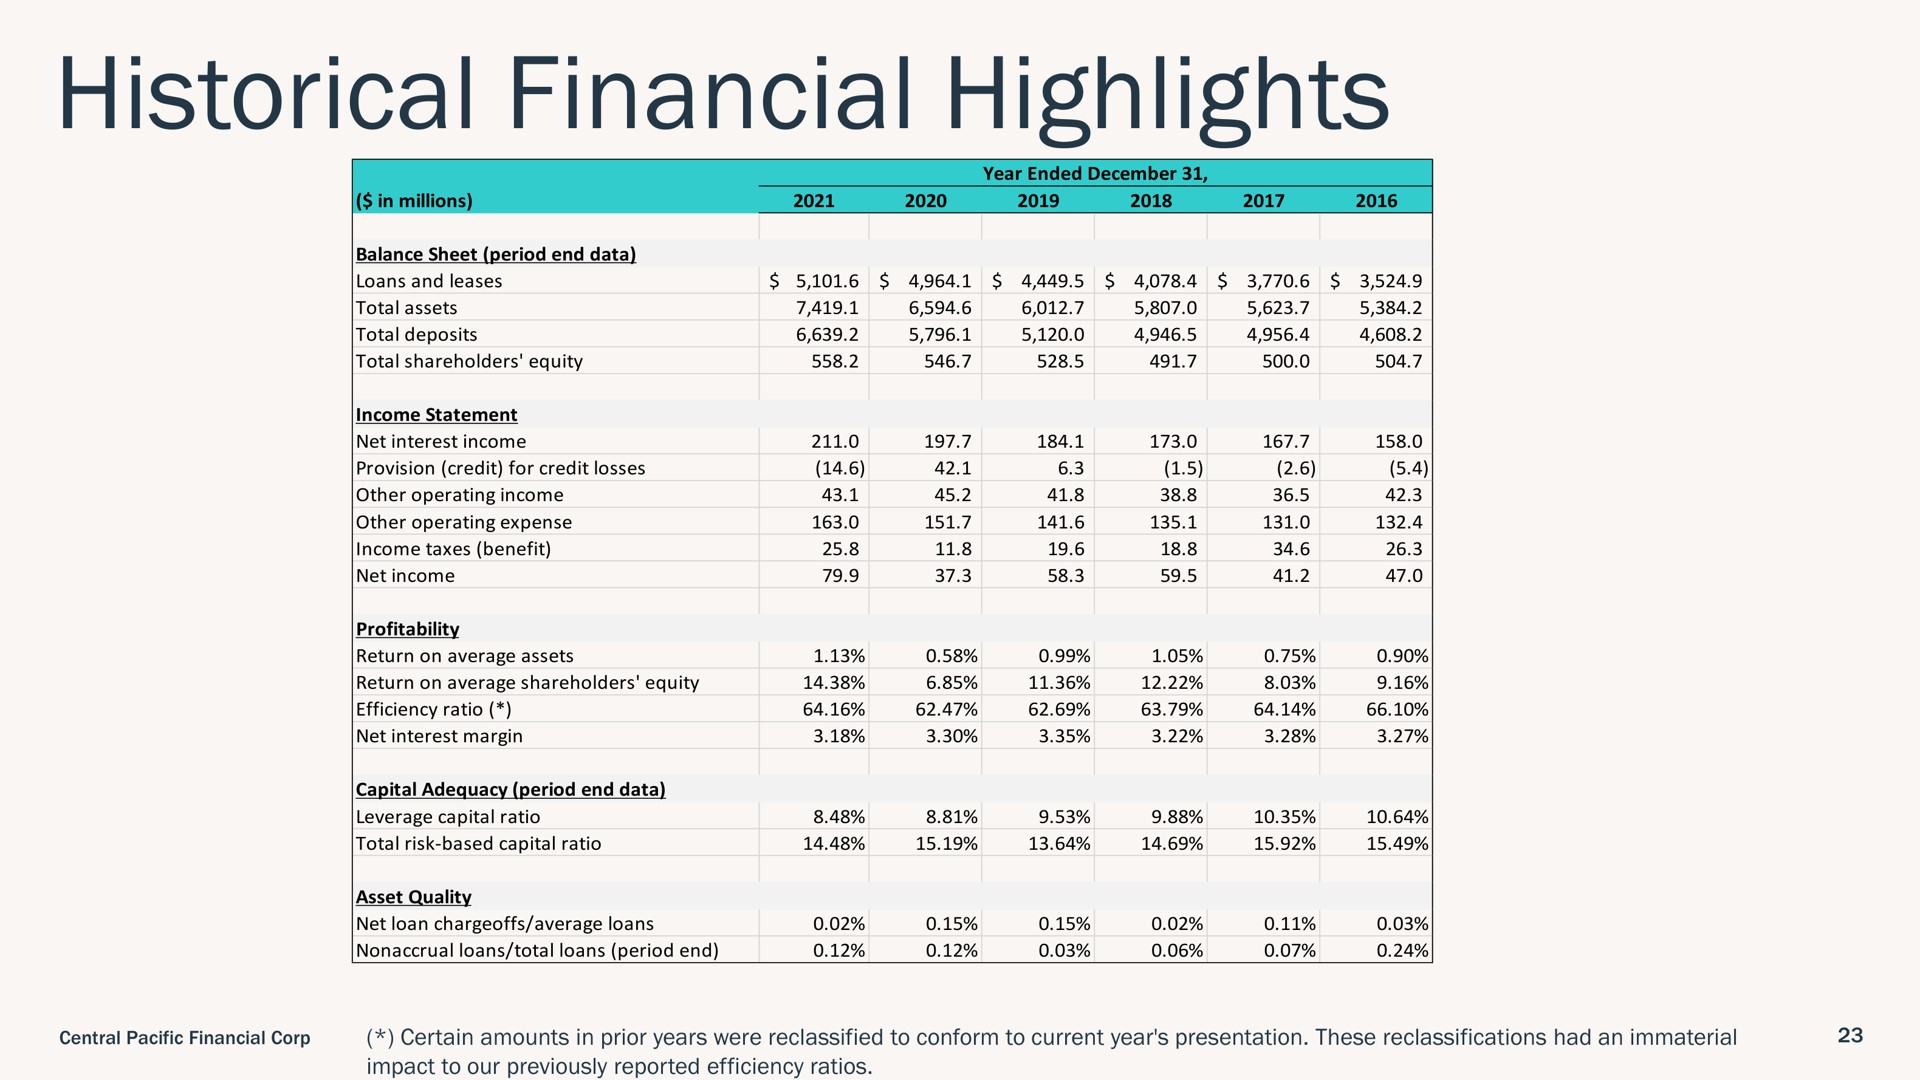 historical financial highlights | Central Pacific Financial